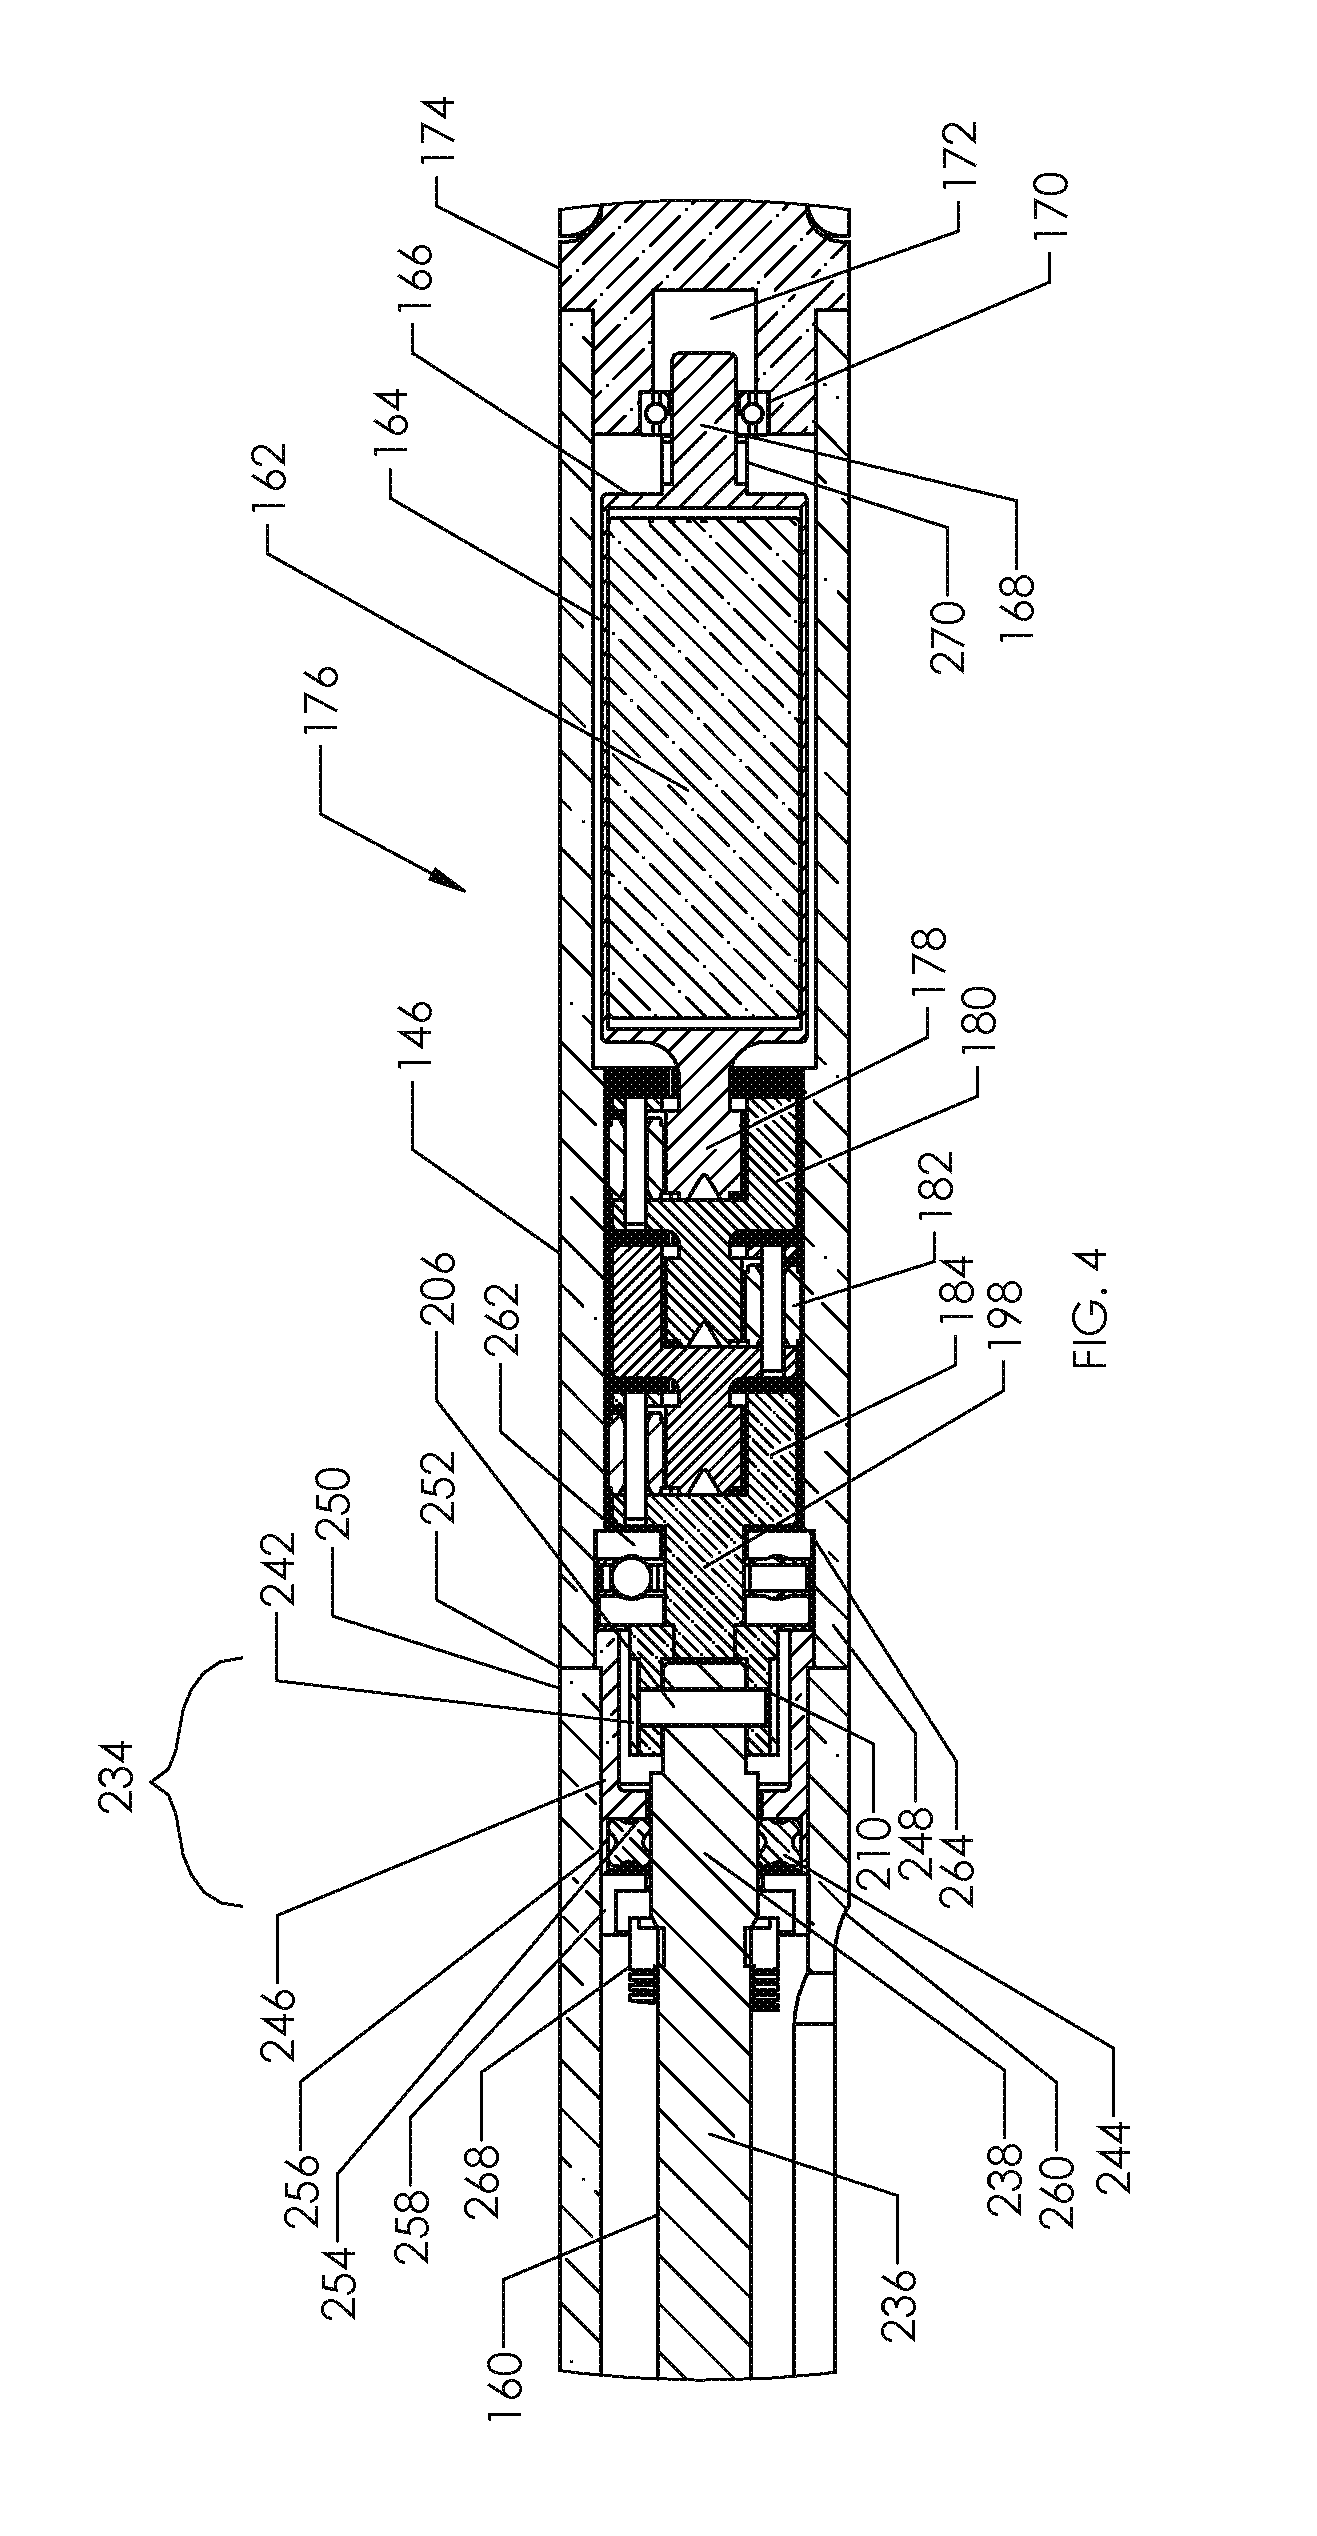 Implantable dynamic apparatus having an anti jamming feature